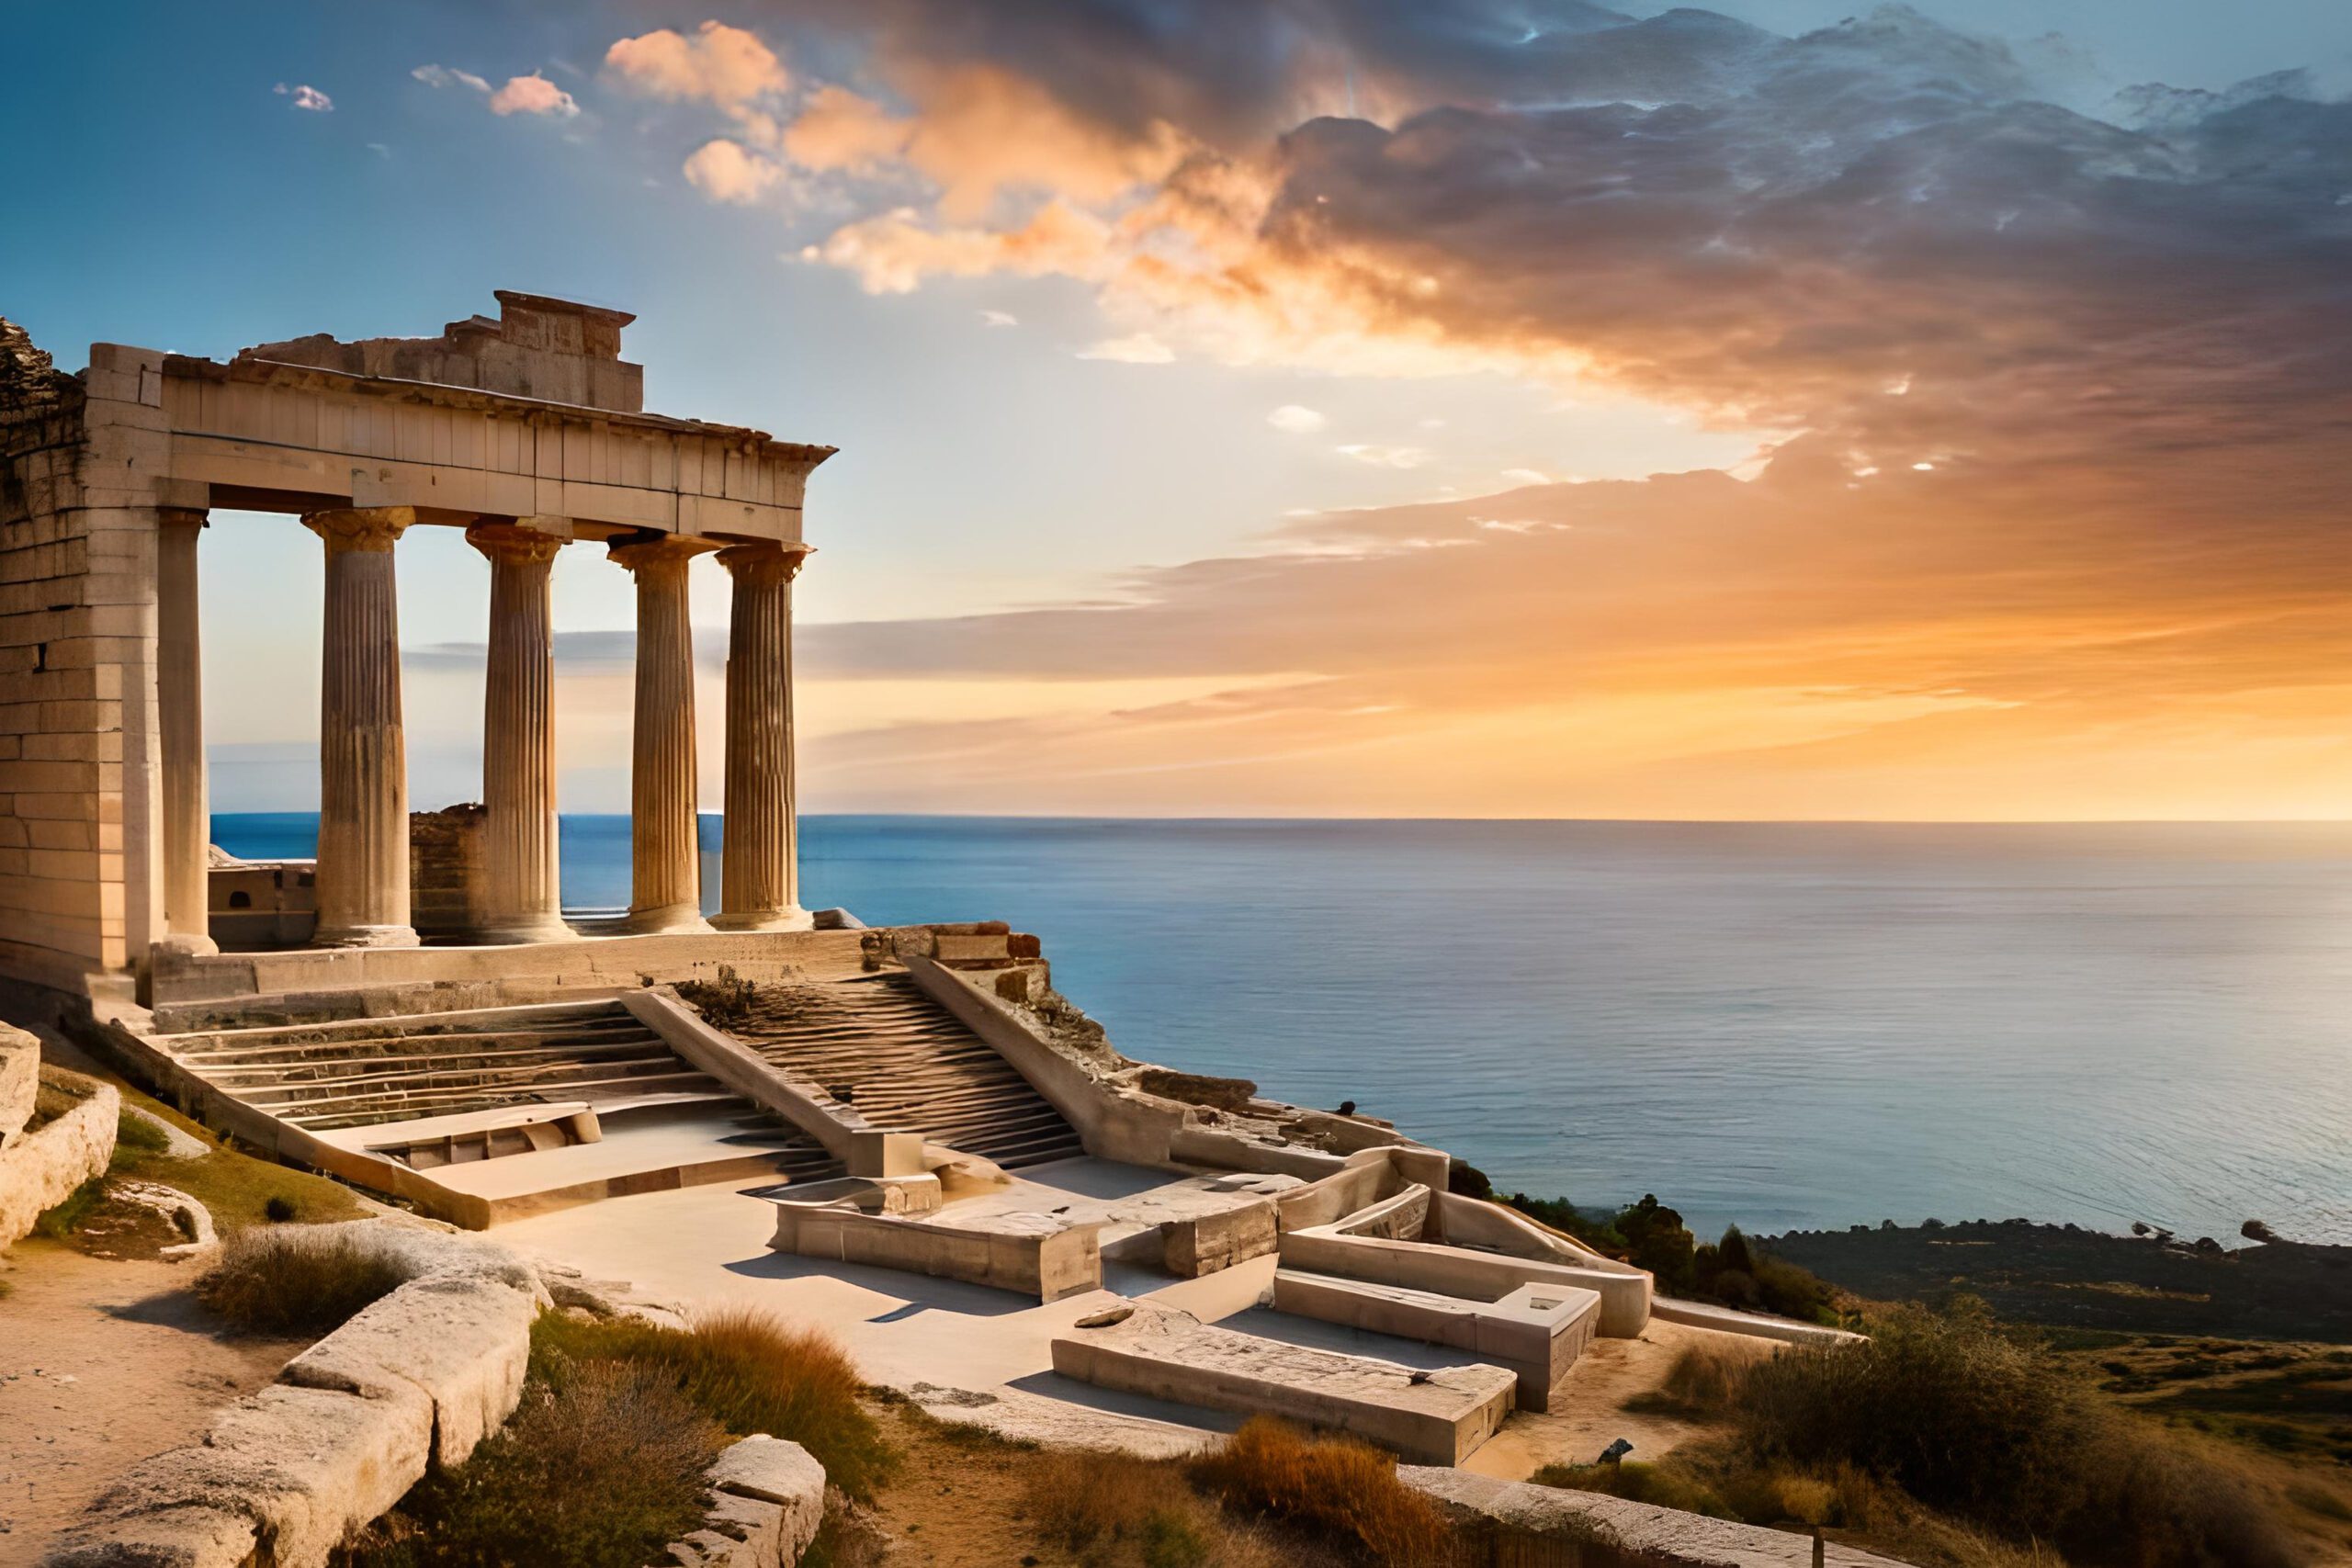 temple-apollo-is-located-hill-overlooking-ocean